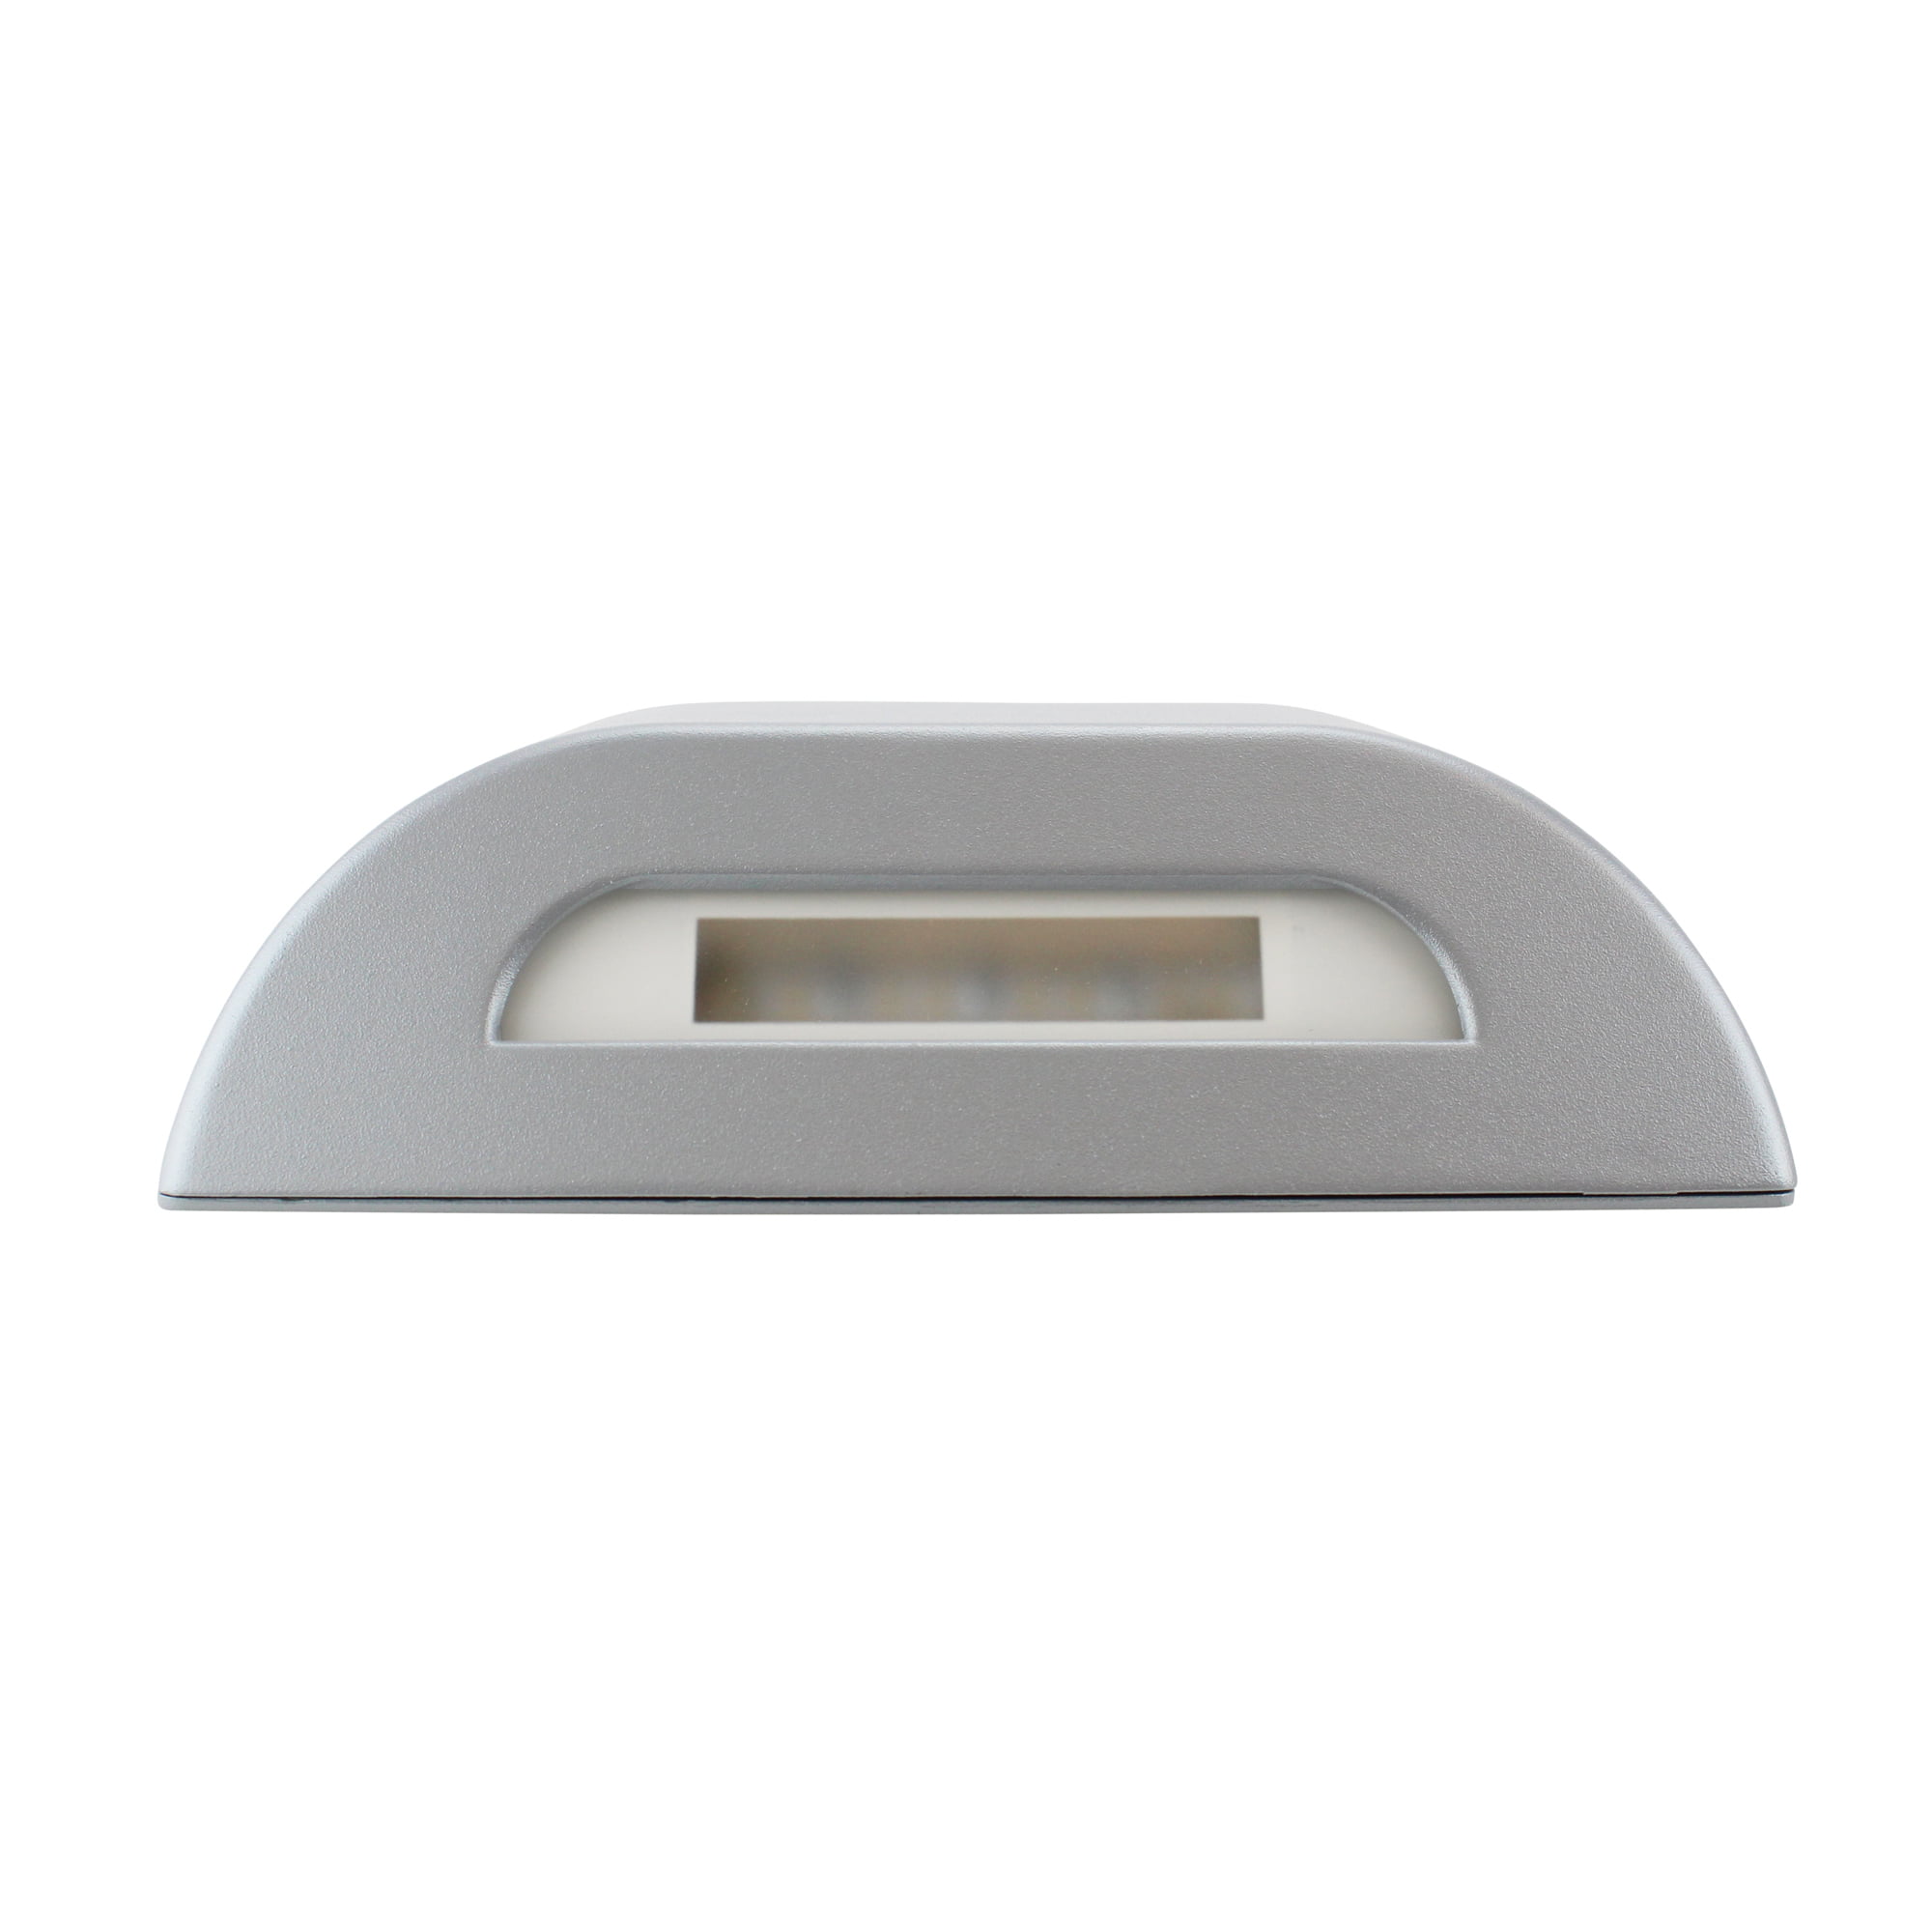 Hubbell Lighting Part # CCU2RC - Hubbell Lighting Dual-Lite 2-Light White  Integrated Led Chicago-Approved Emergency Light With Remote Capability - Emergency  Lighting - Home Depot Pro